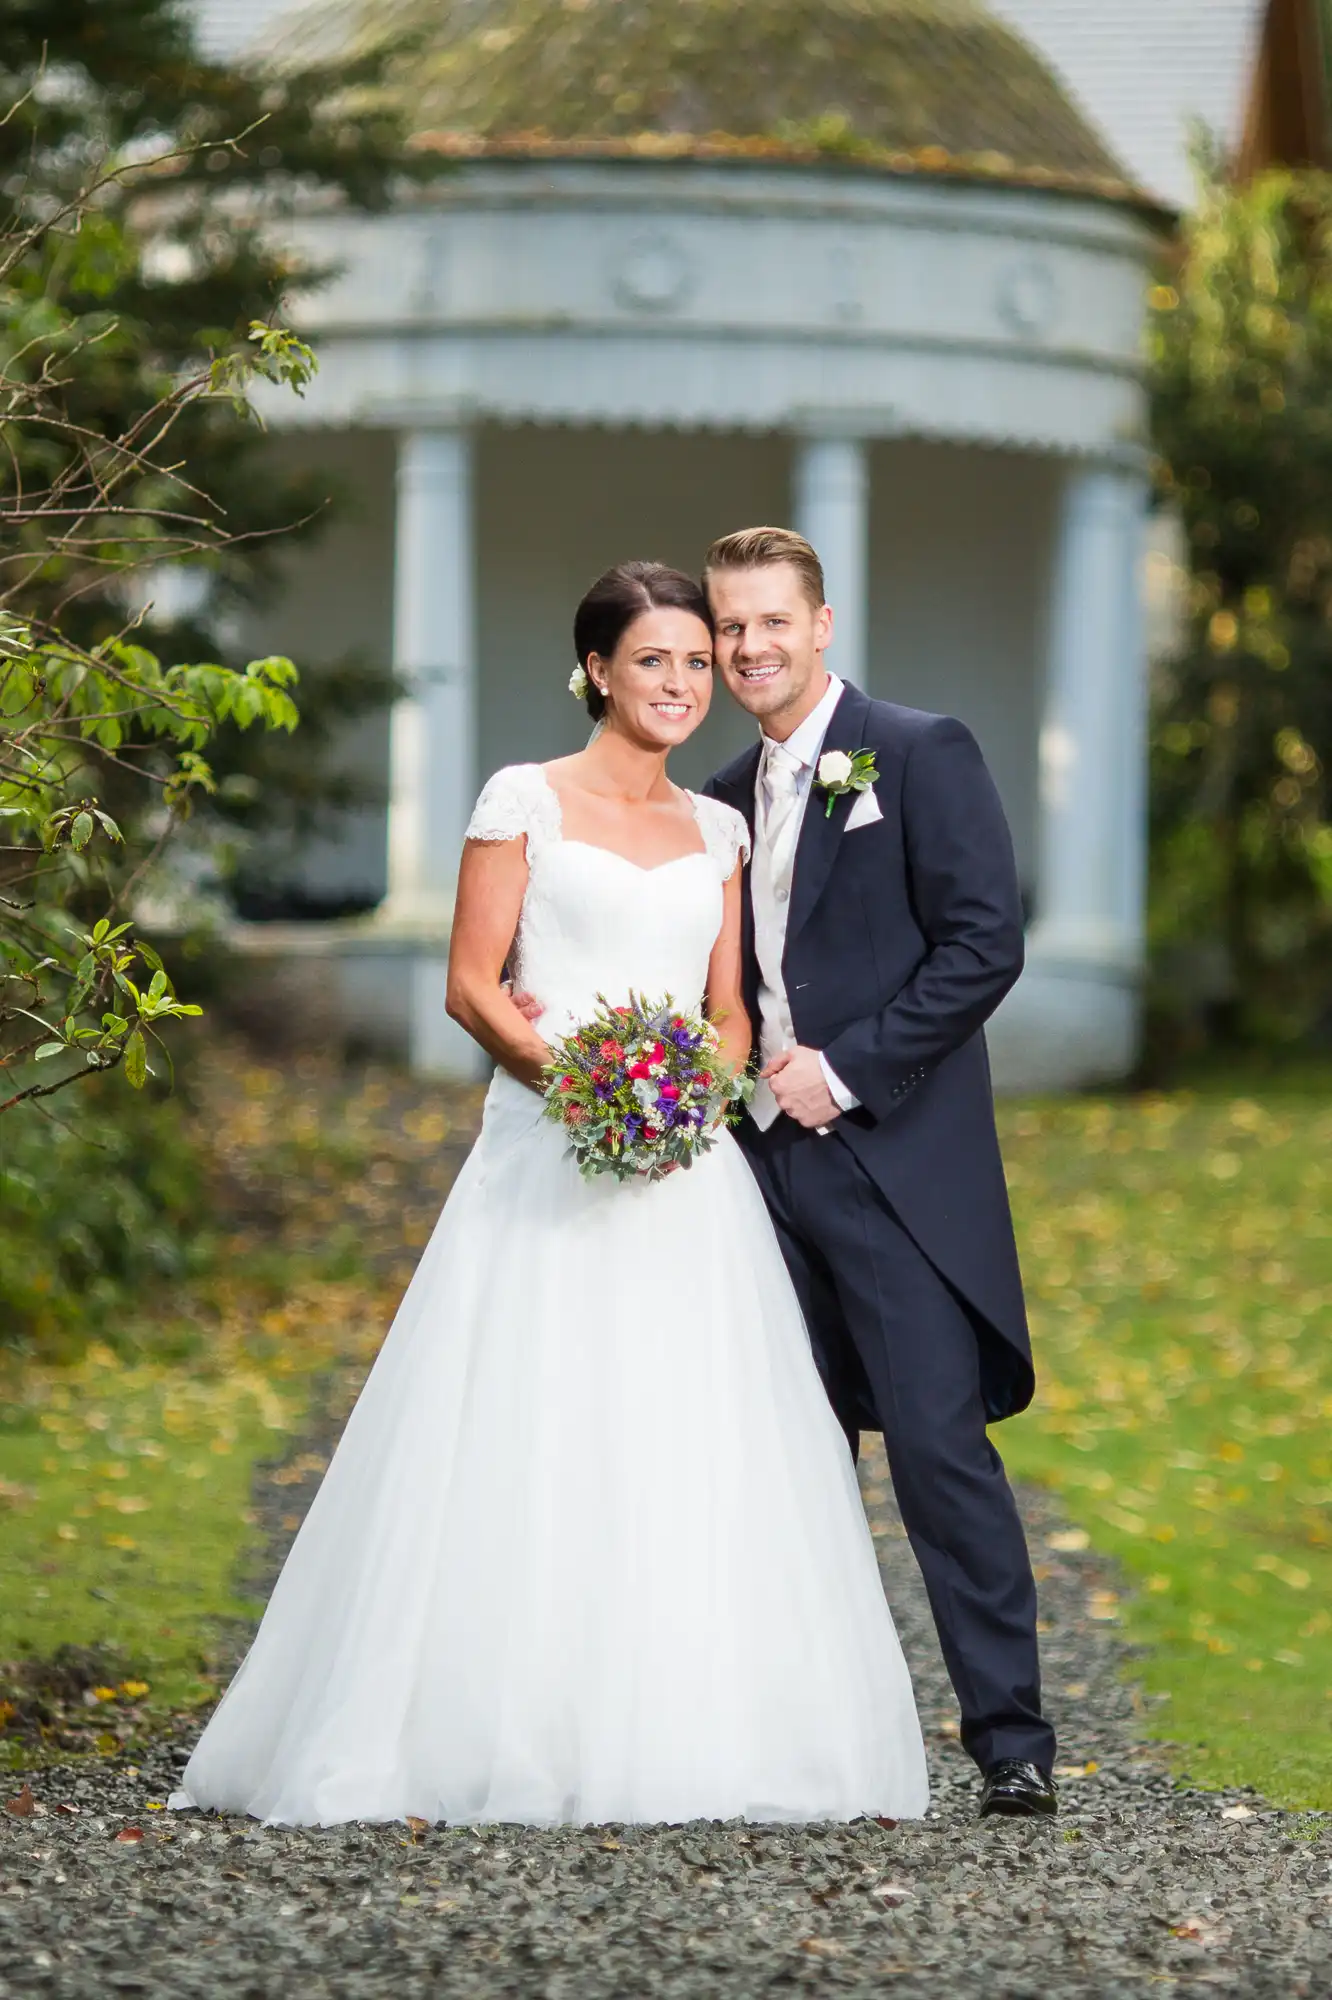 A bride and groom smiling and posing in front of a gazebo, the bride in a white wedding dress holding a colorful bouquet, and the groom in a dark suit with a boutonniere.